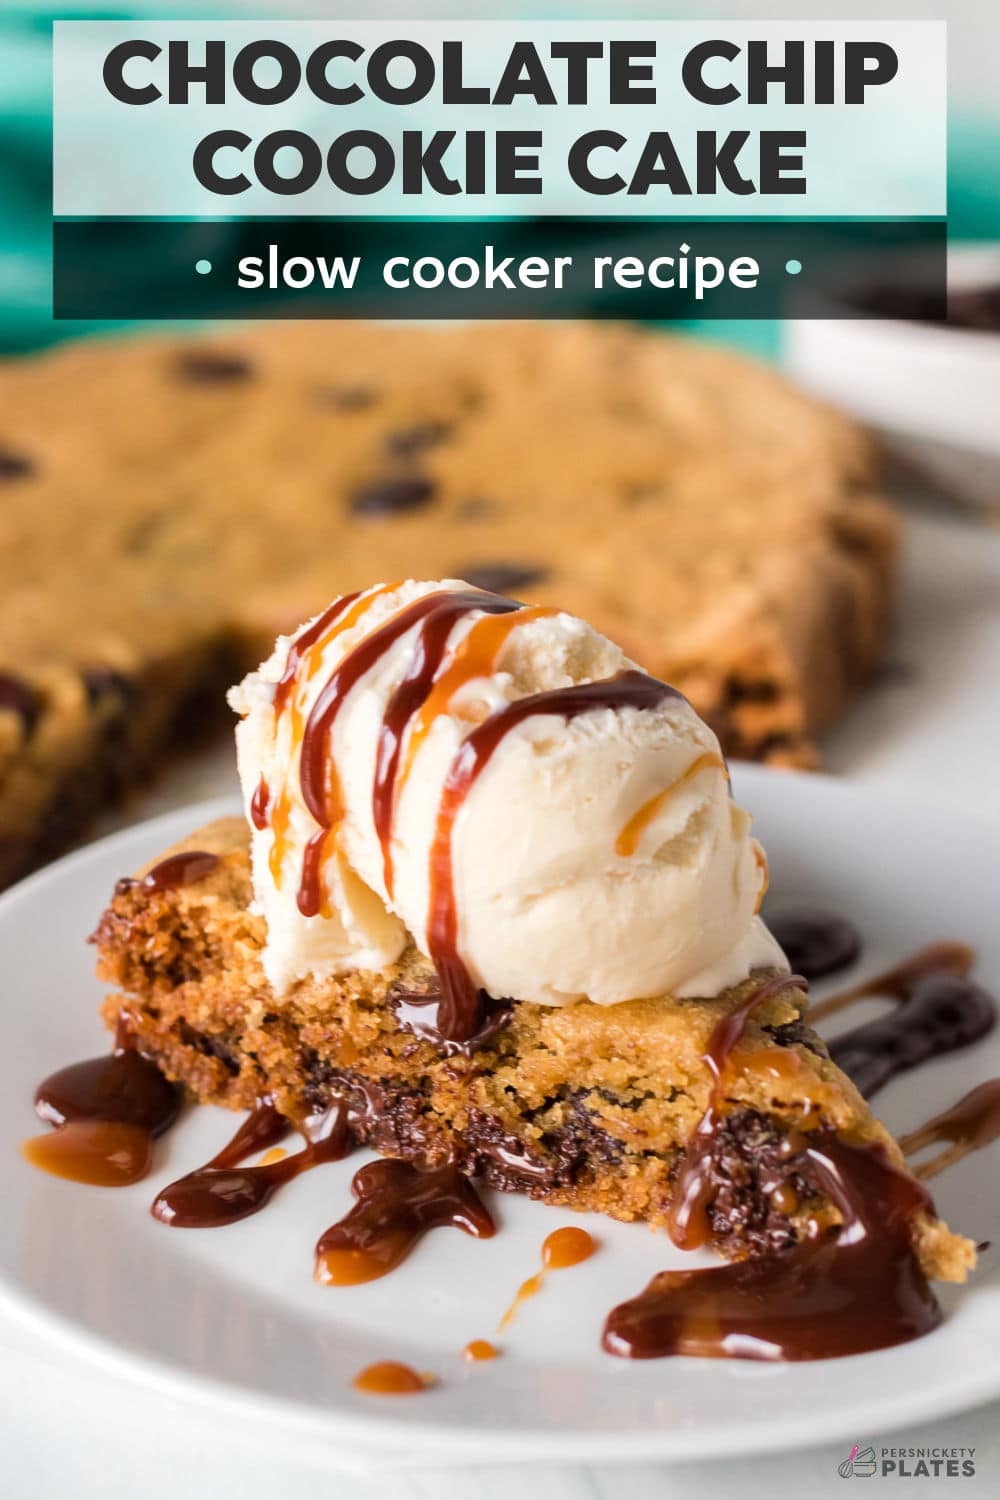 Slow cooker chocolate chip cookie cake is a one-bowl recipe cooked low and slow resulting in a perfectly chewy center with slightly crispy edges. | www.persnicketyplates.com